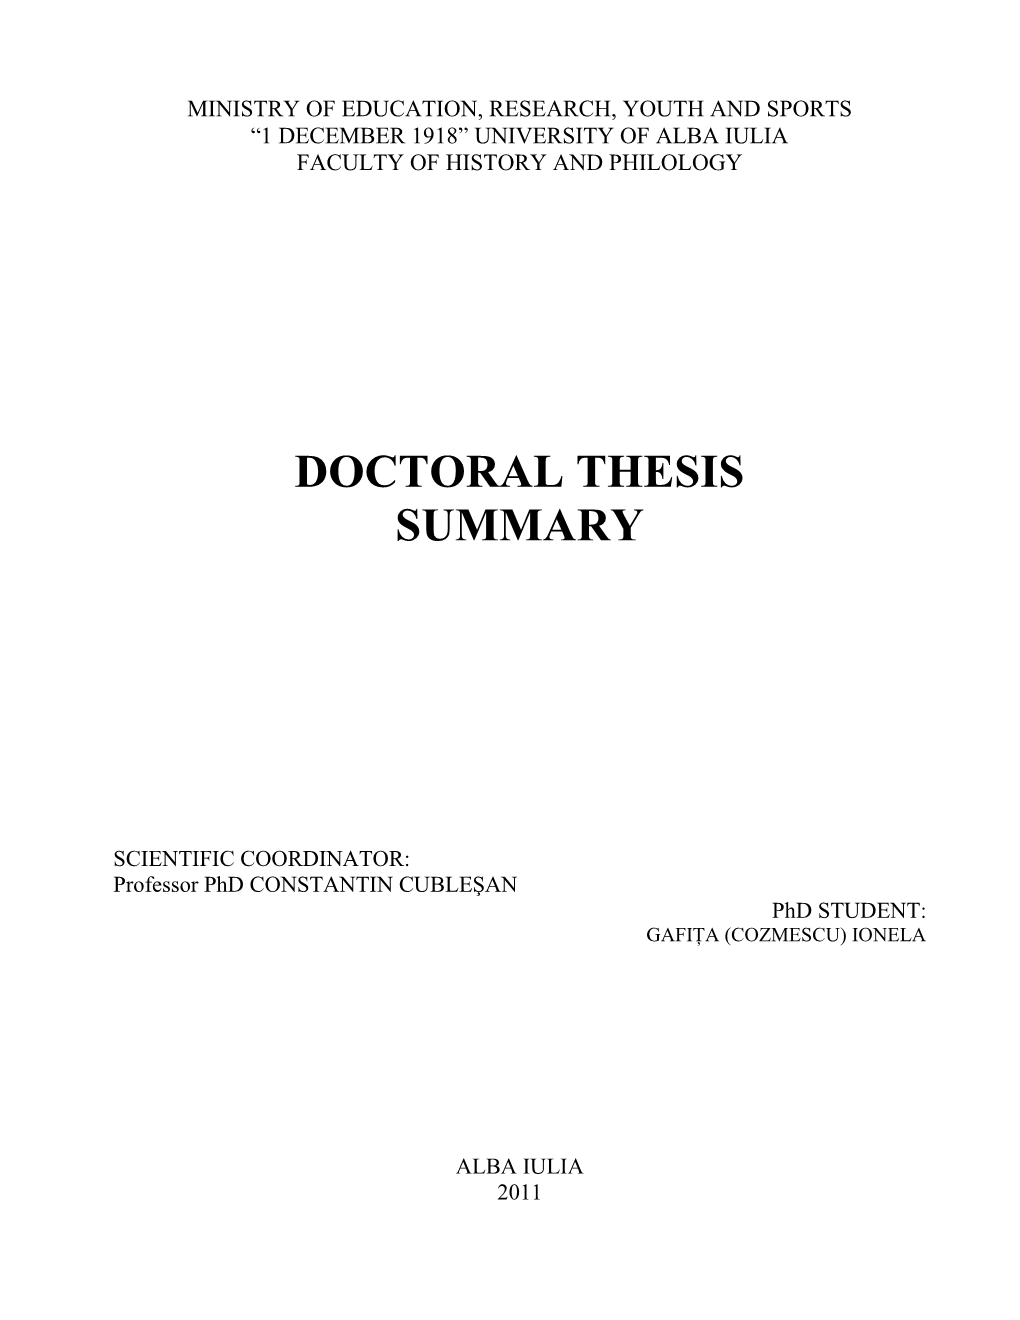 Doctoral Thesis Summary